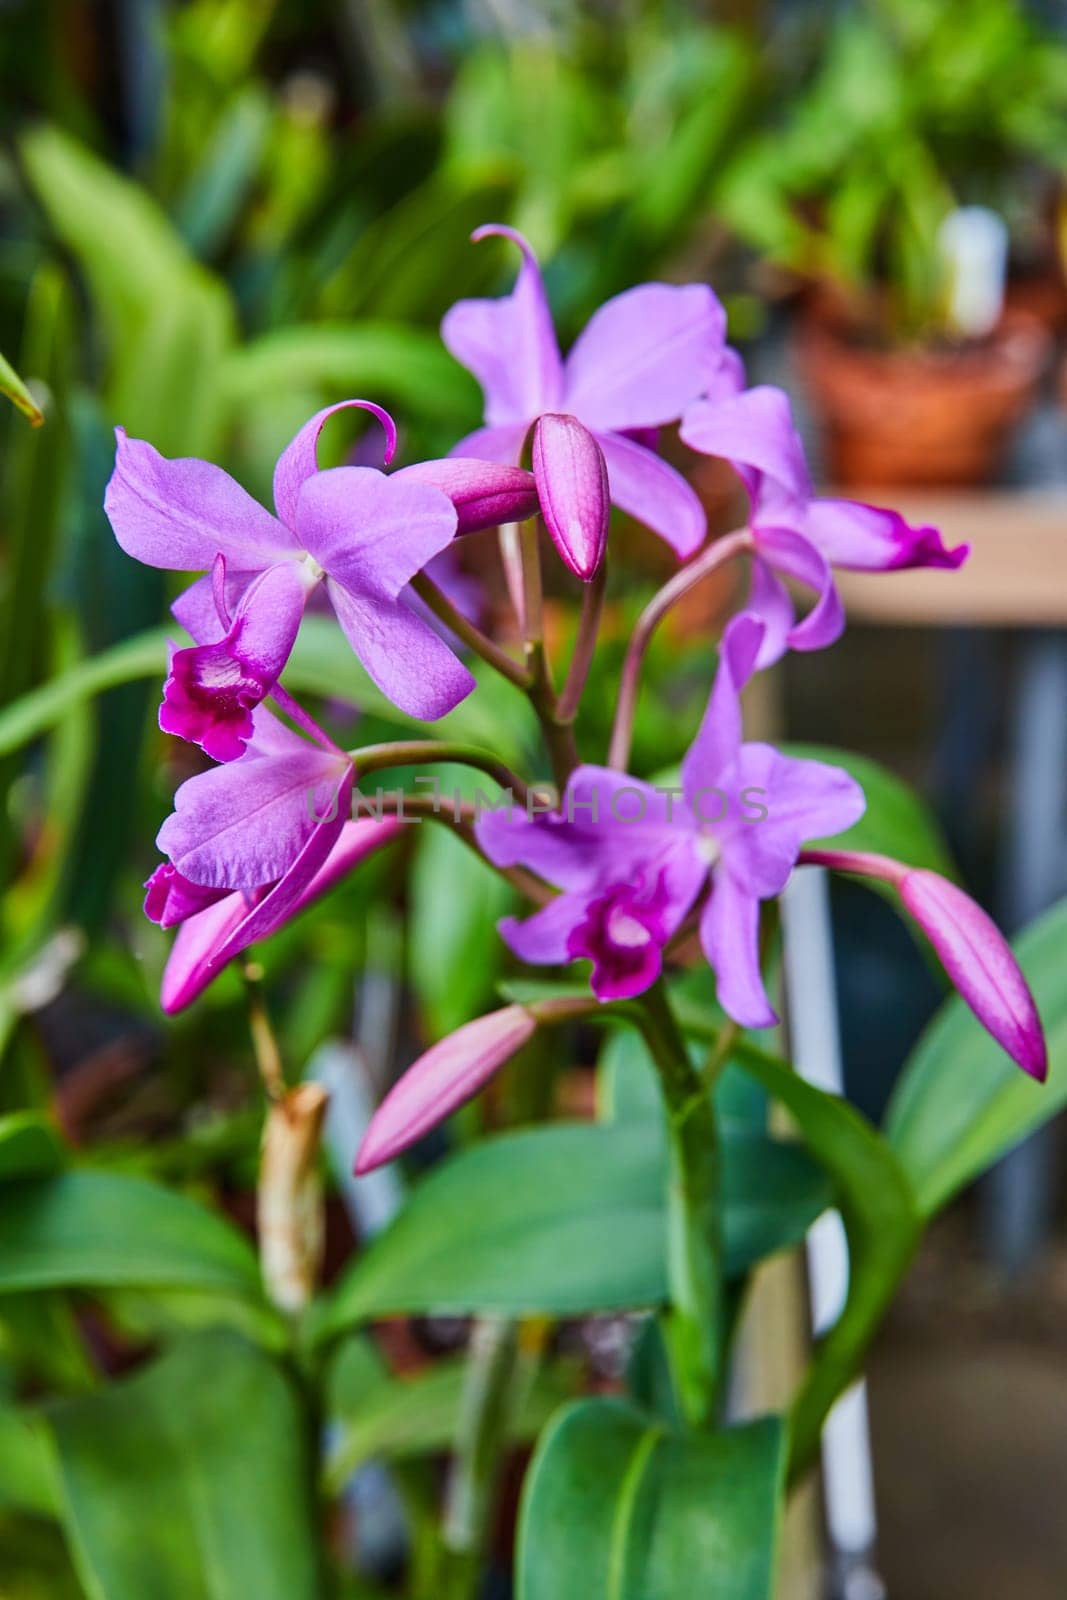 Vibrant Purple Orchids in Greenhouse, Shallow Depth Focus by njproductions